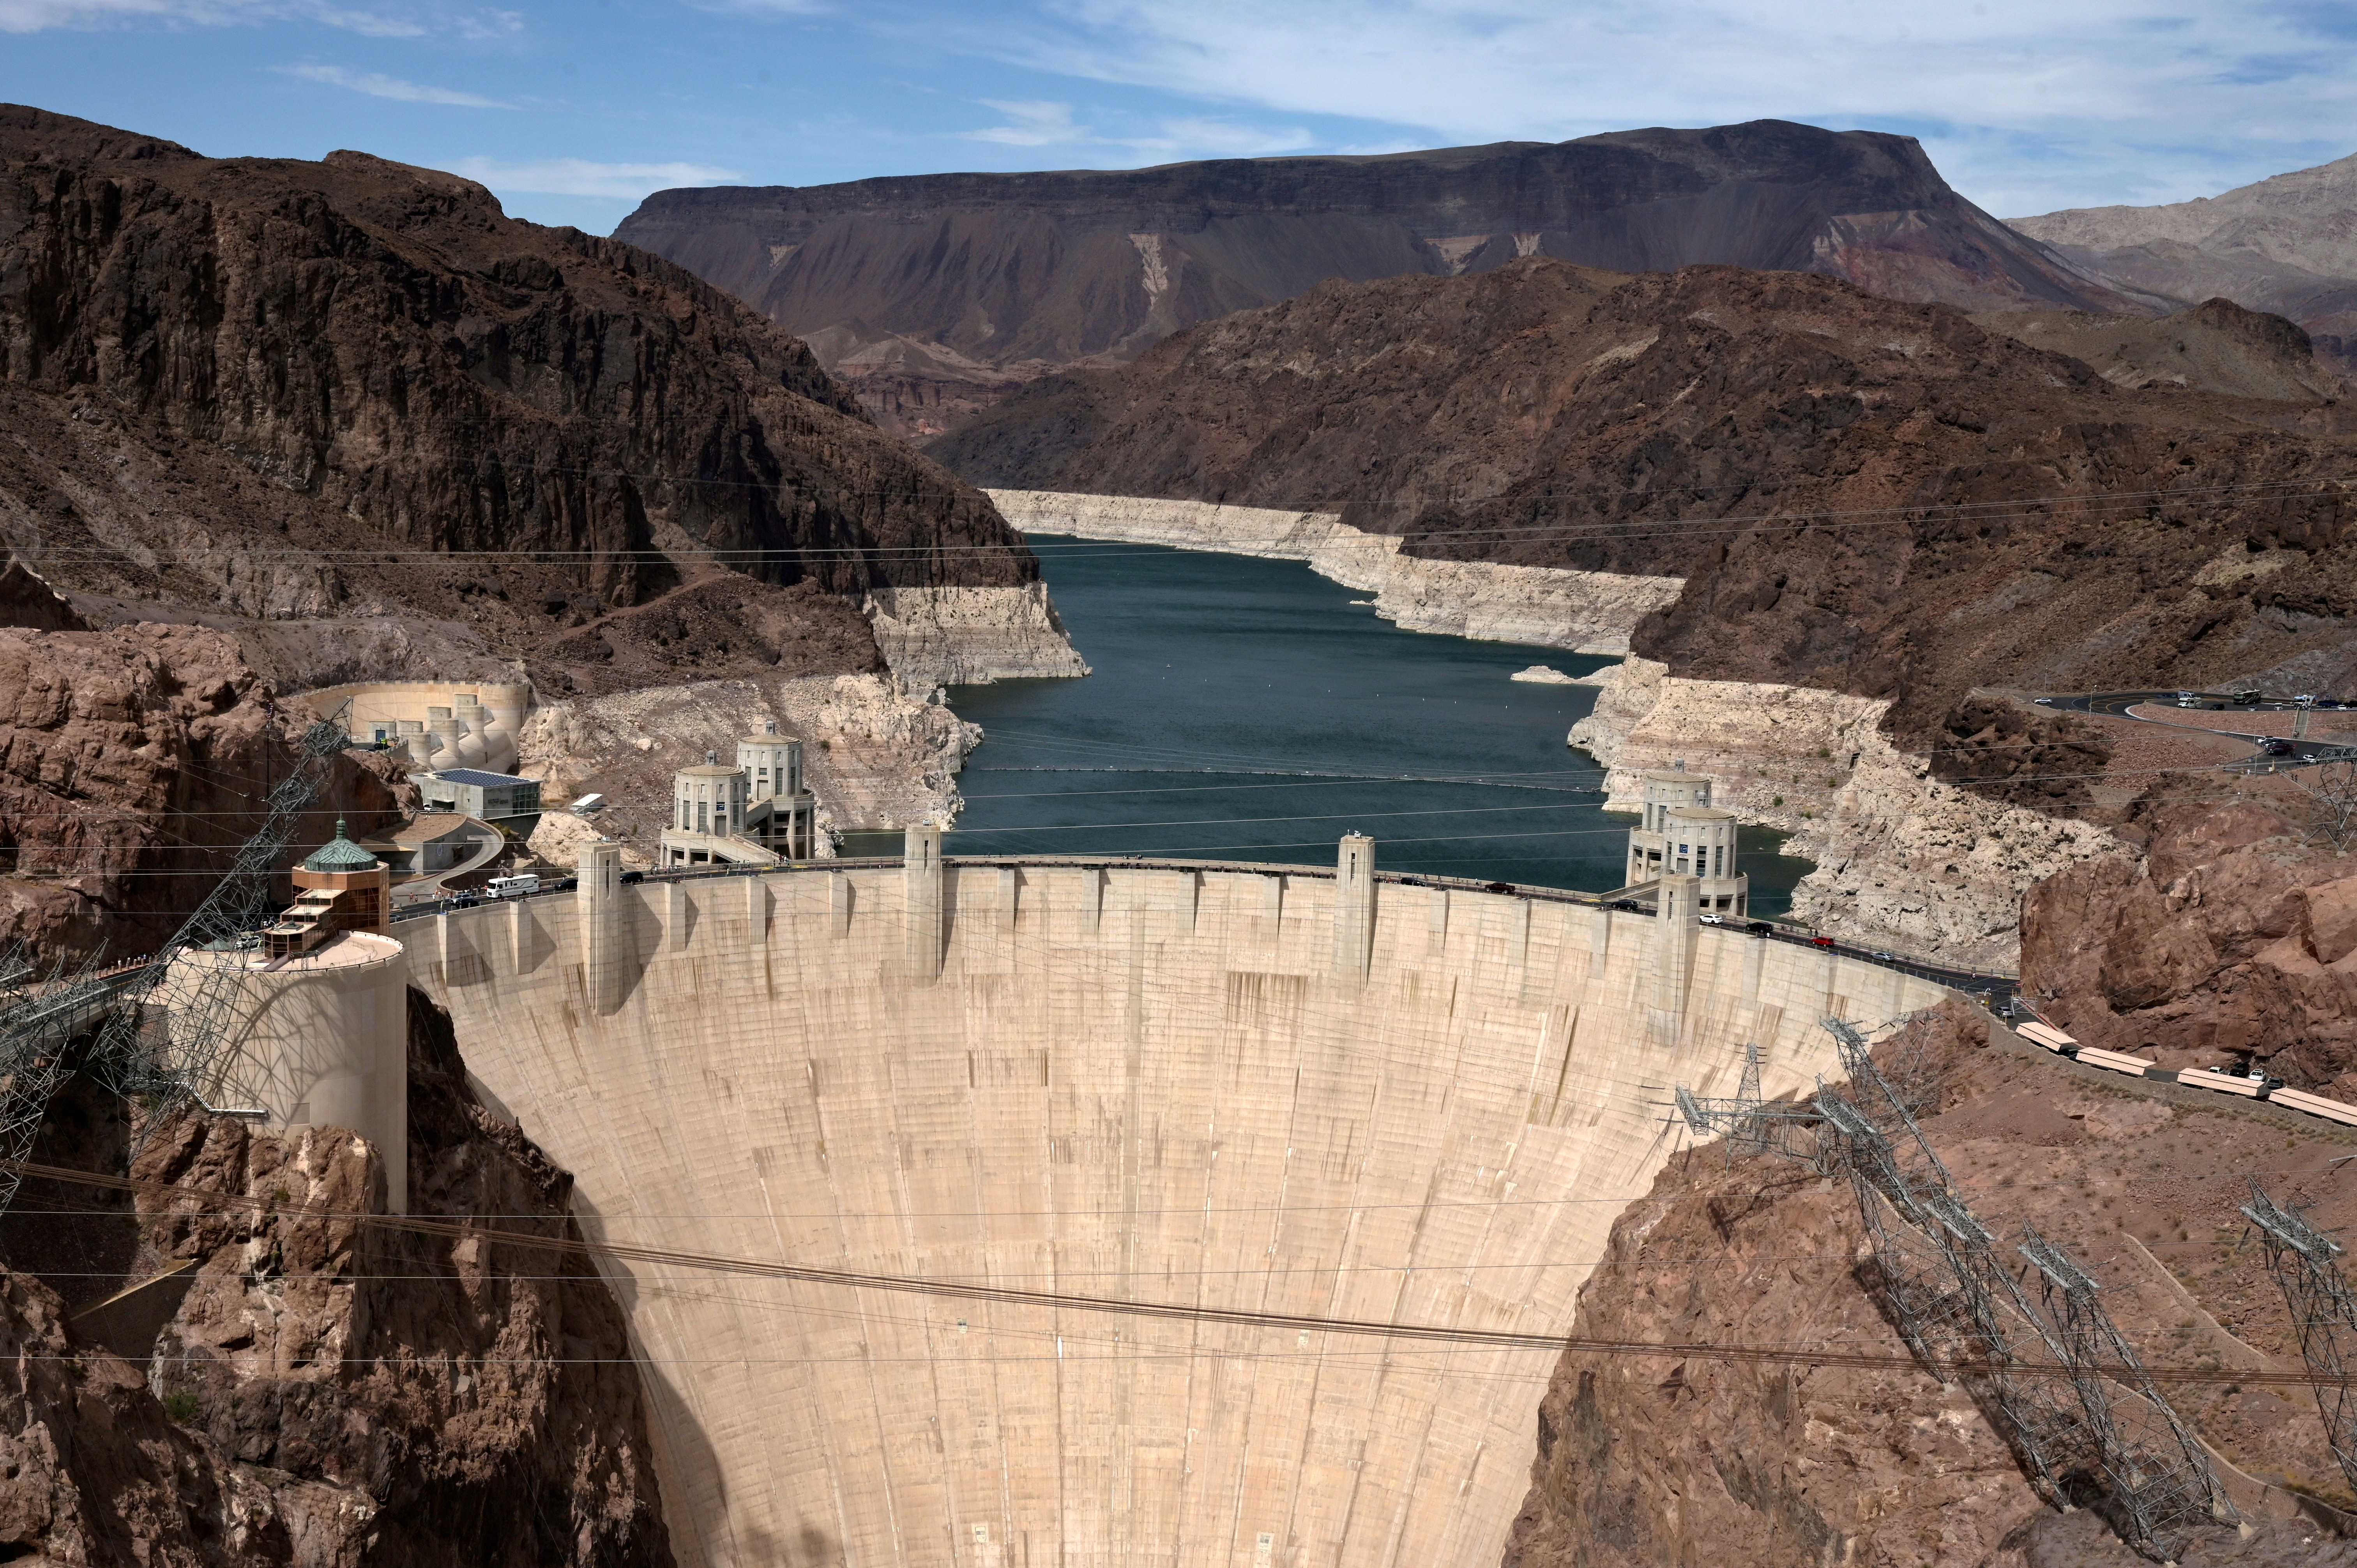 Hoover Dam reservoir sinks to record low, in sign of extreme Western U.S. drought